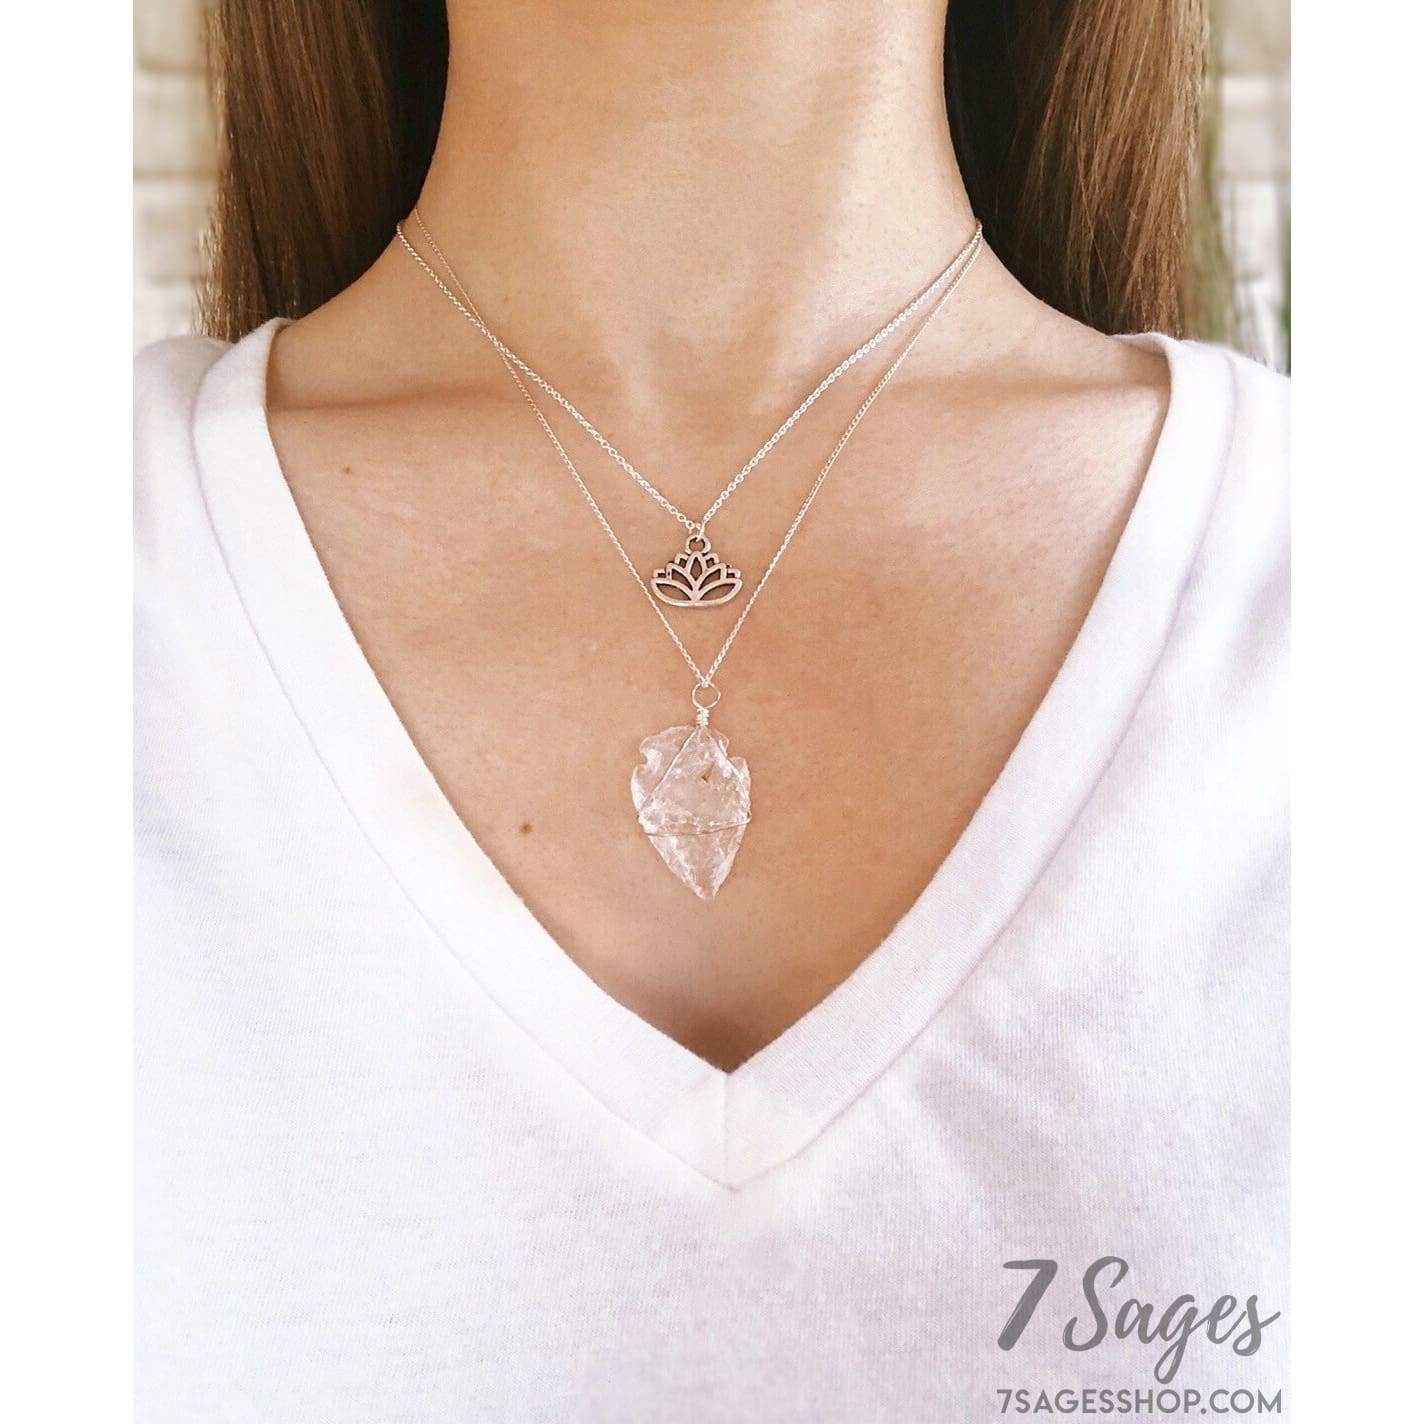 Crystal Layered Silver Necklace - Sterling Silver Necklace - Healing Crystals and Stones - Crystals - Boho Layered Crystal Necklace